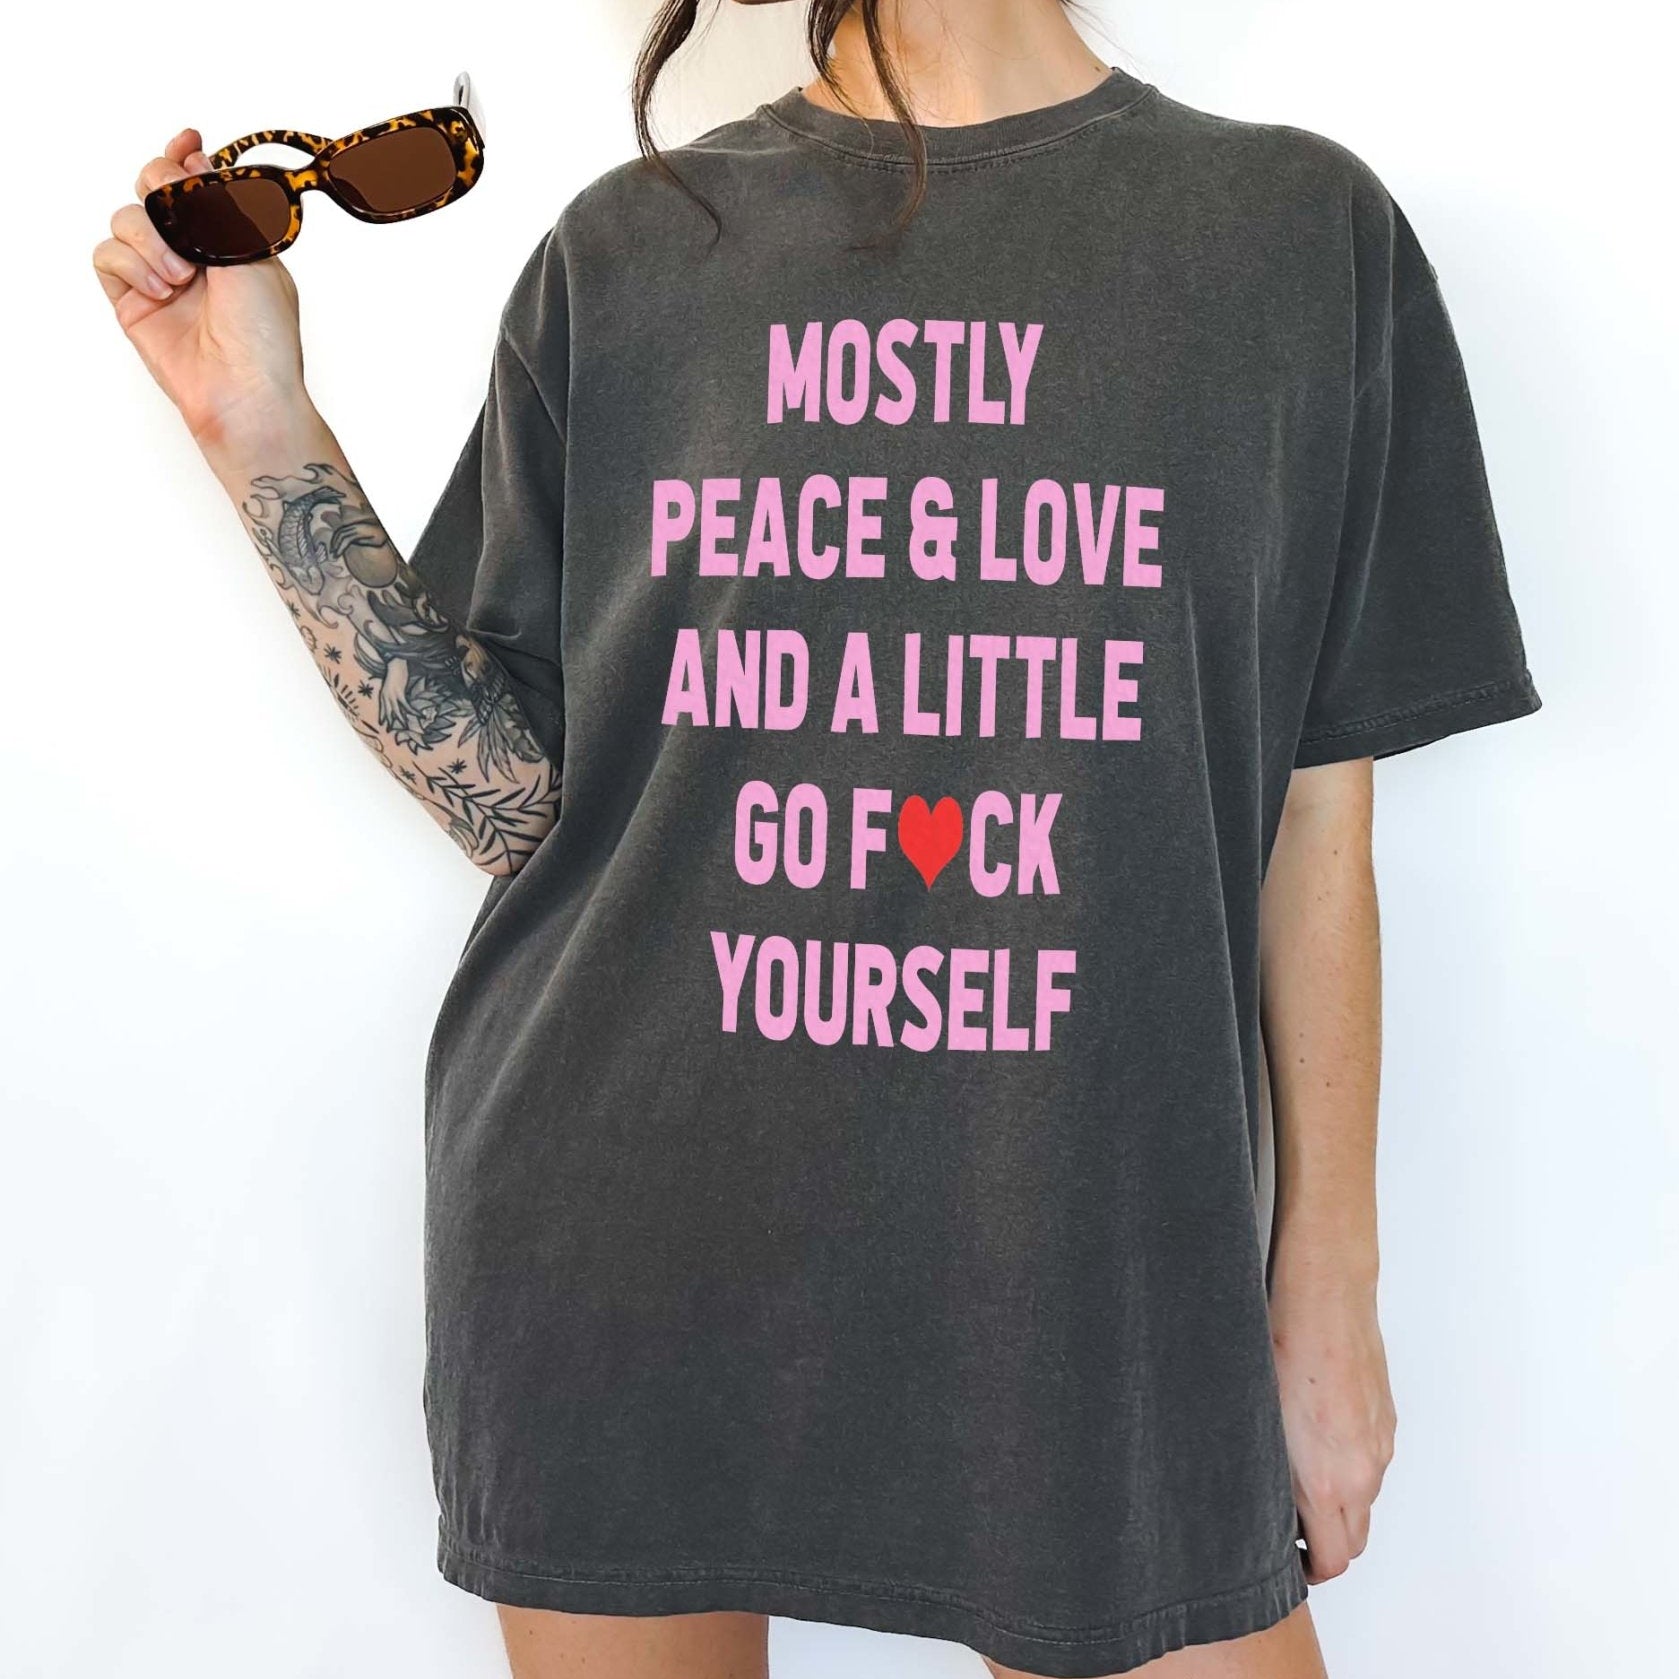 Mostly Peace & Love And A Little Go Fuck Yourself Tee - UntamedEgo LLC.